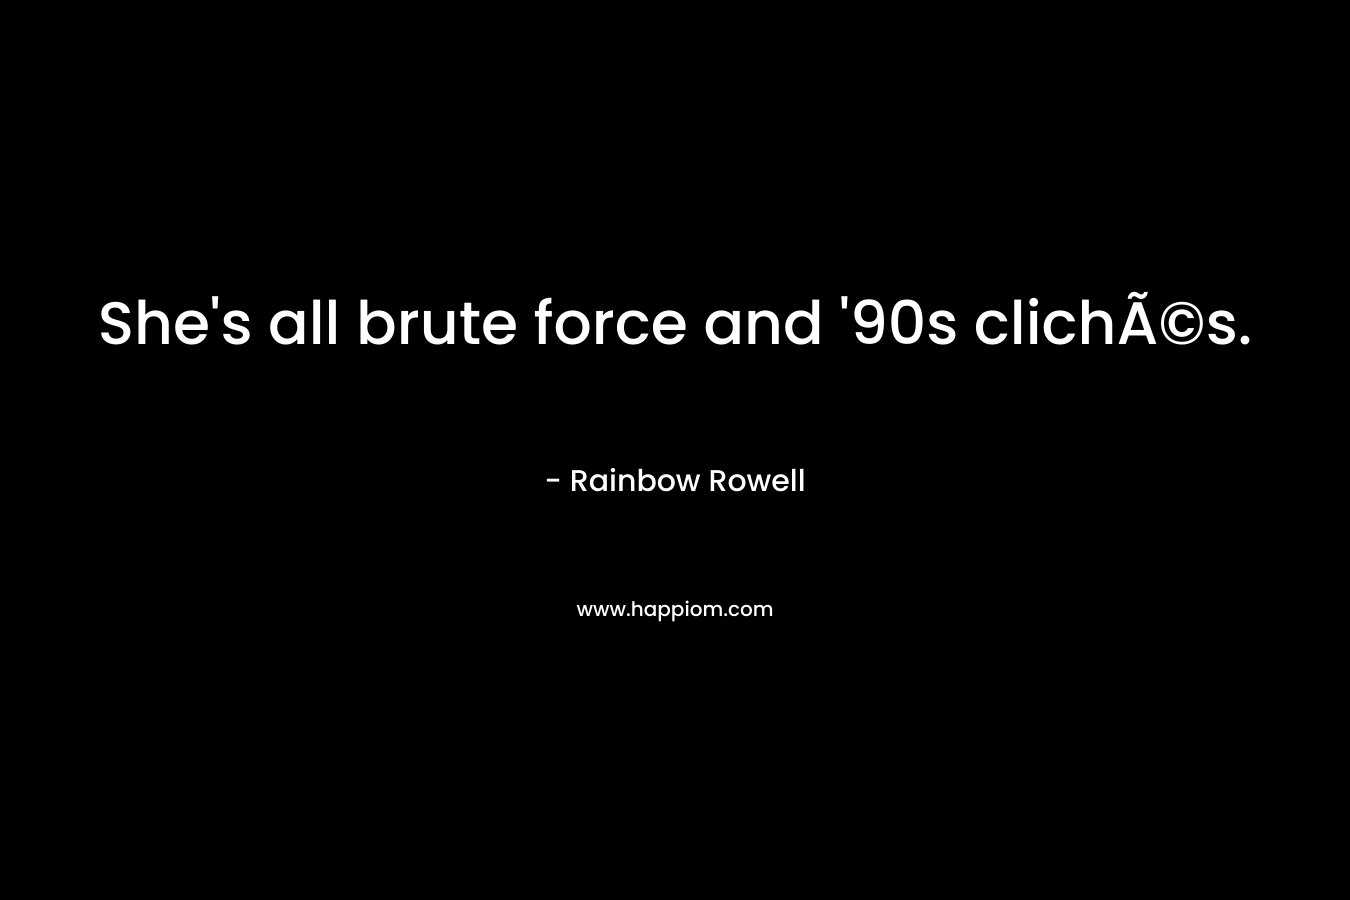 She’s all brute force and ’90s clichÃ©s. – Rainbow Rowell